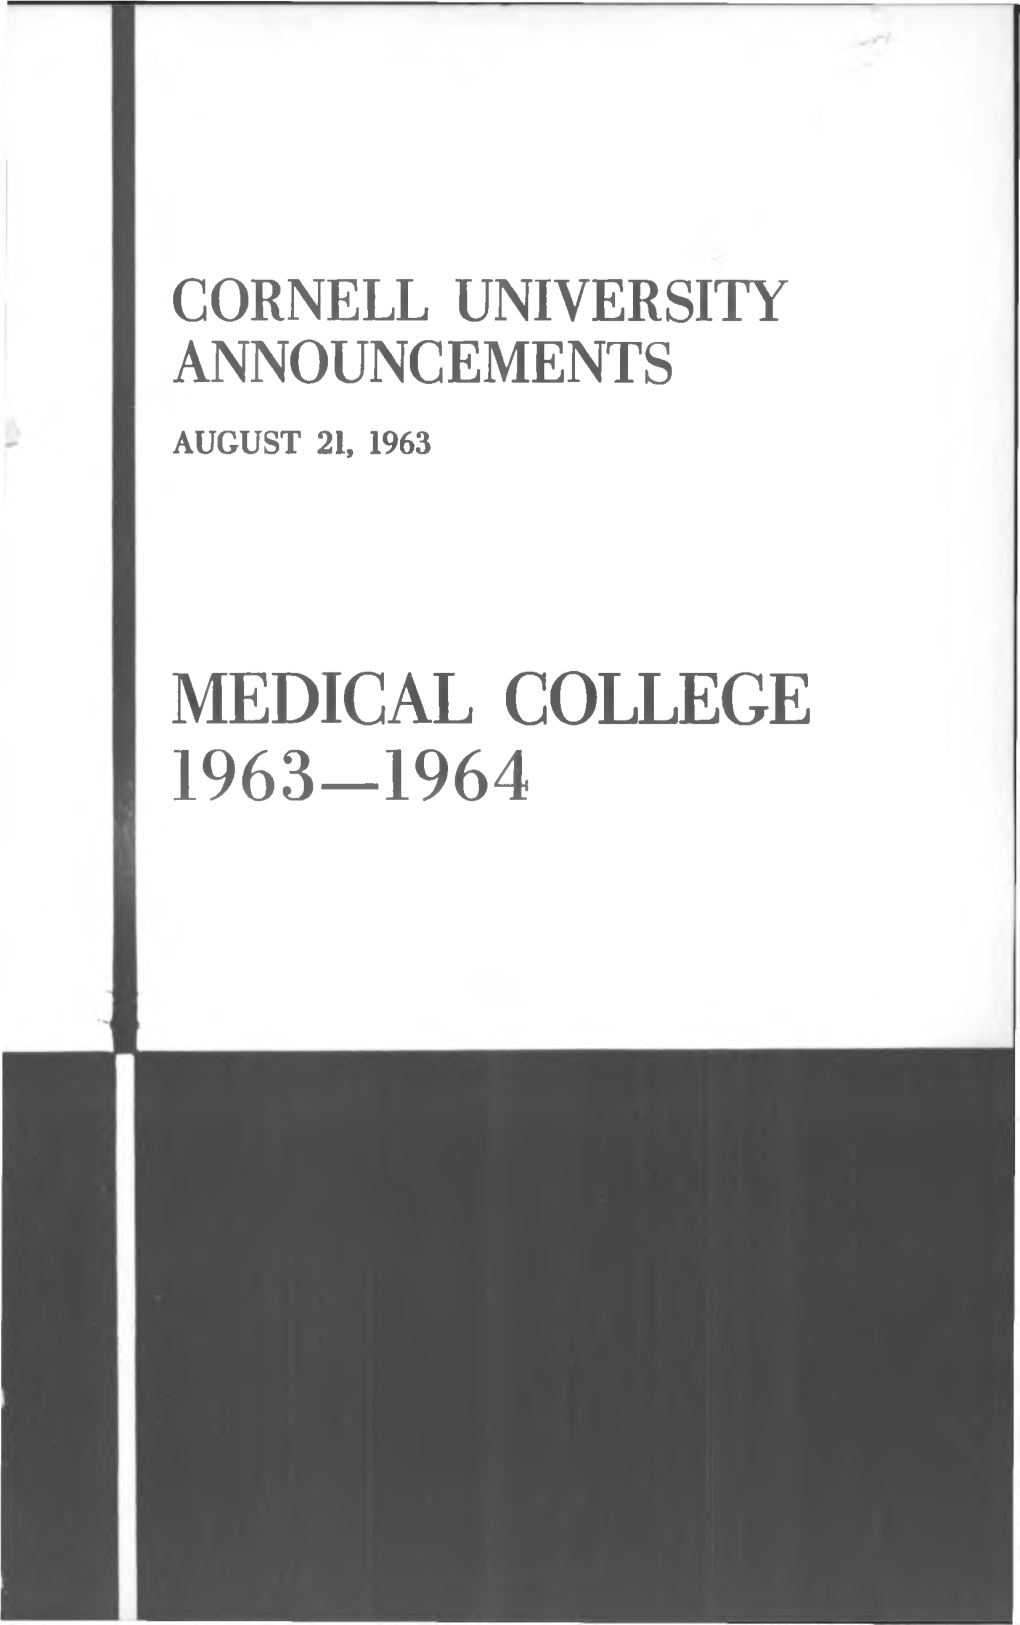 Medical College 1963-1964 Cornell University Announcements